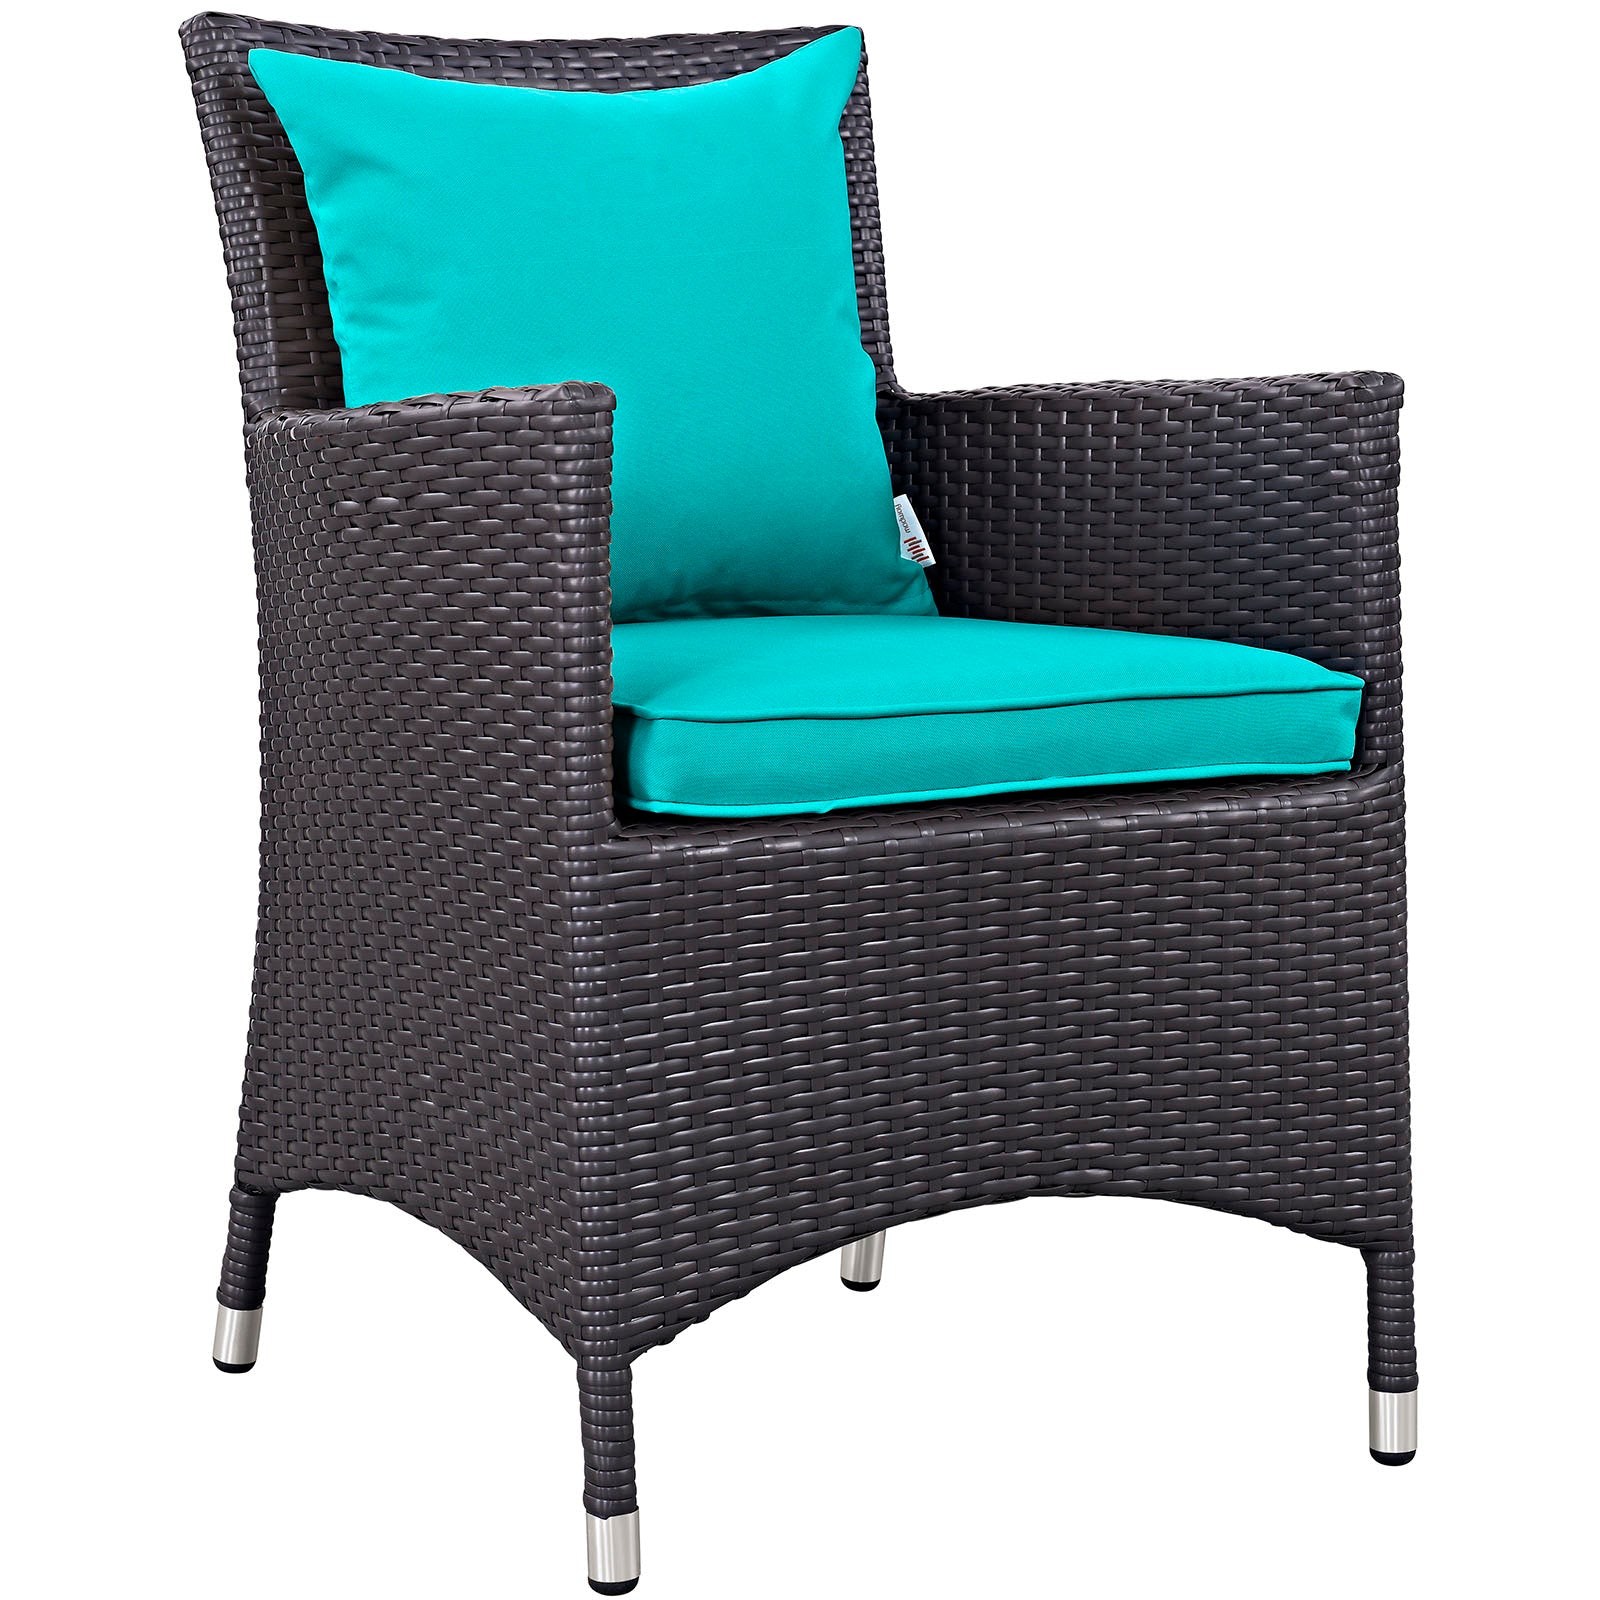 Modway Outdoor Dining Sets - Convene 2 Piece Outdoor Patio Dining Set Espresso Turquoise